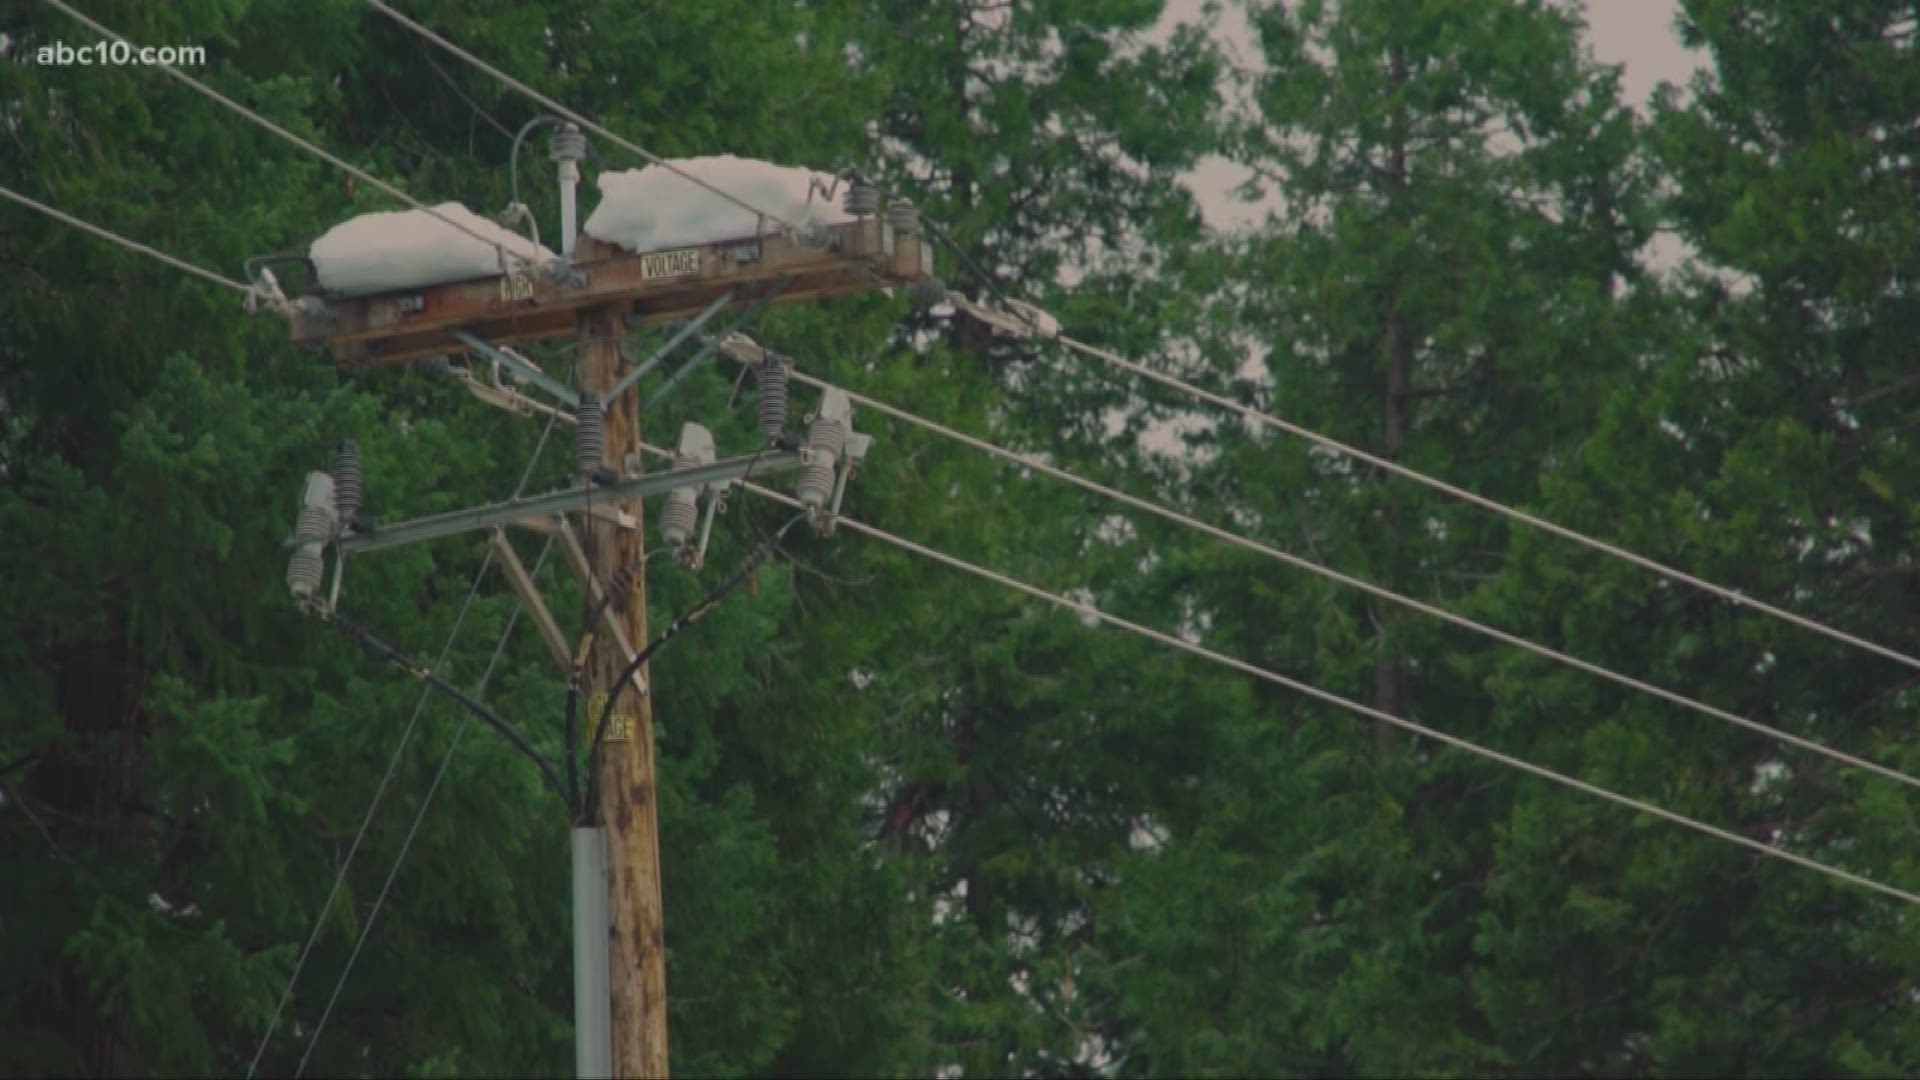 The power outage was between 5 p.m. to 10 p.m. Saturday. The outage was from one to two hours in length.